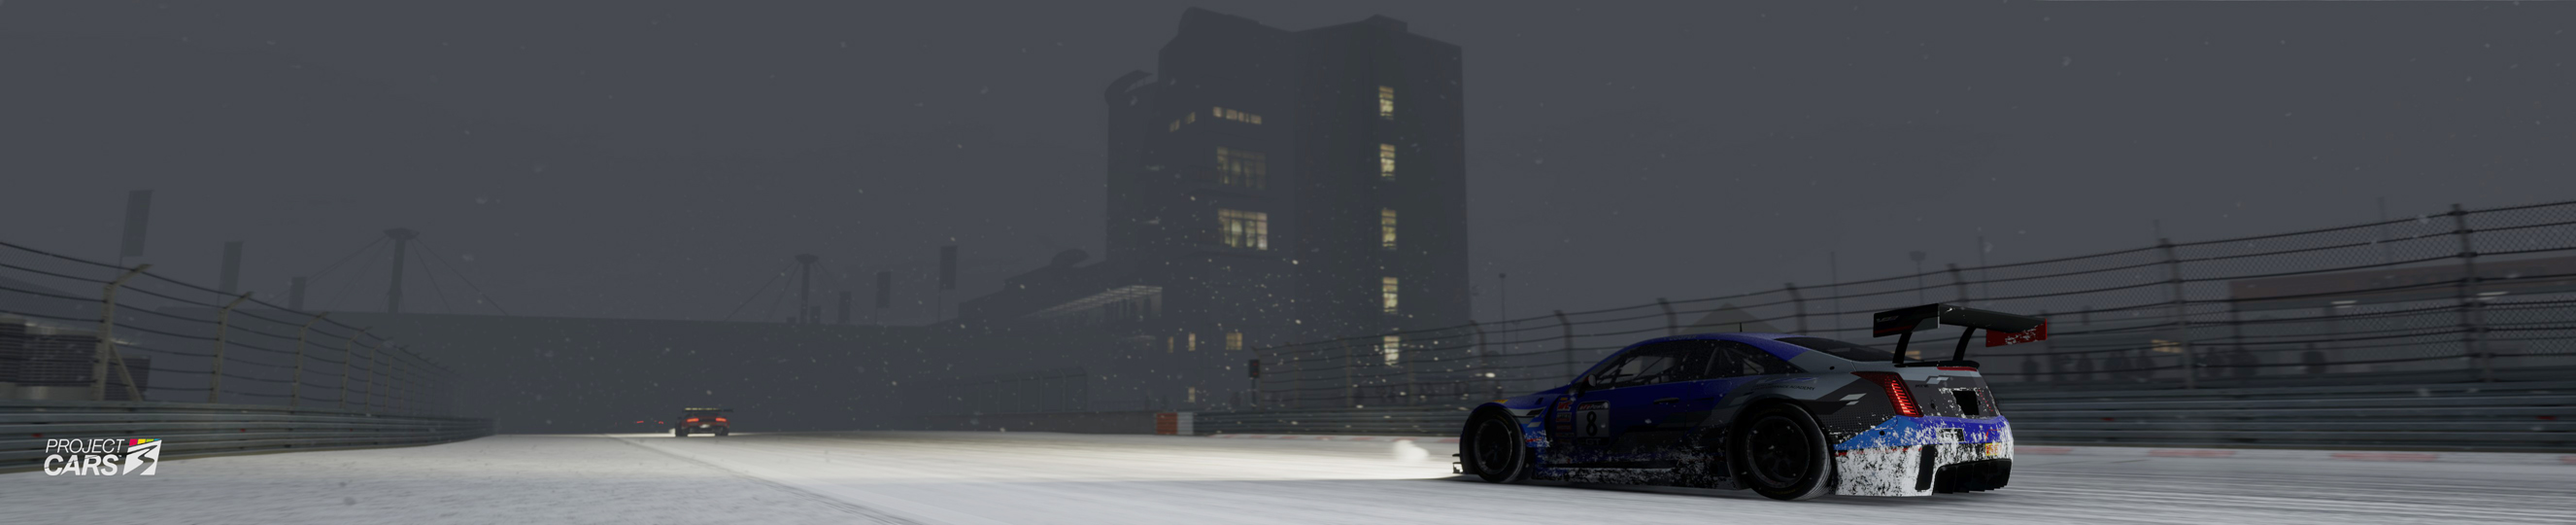 6 PROJECT CARS GT3 at NORDS Snow crop copy.jpg